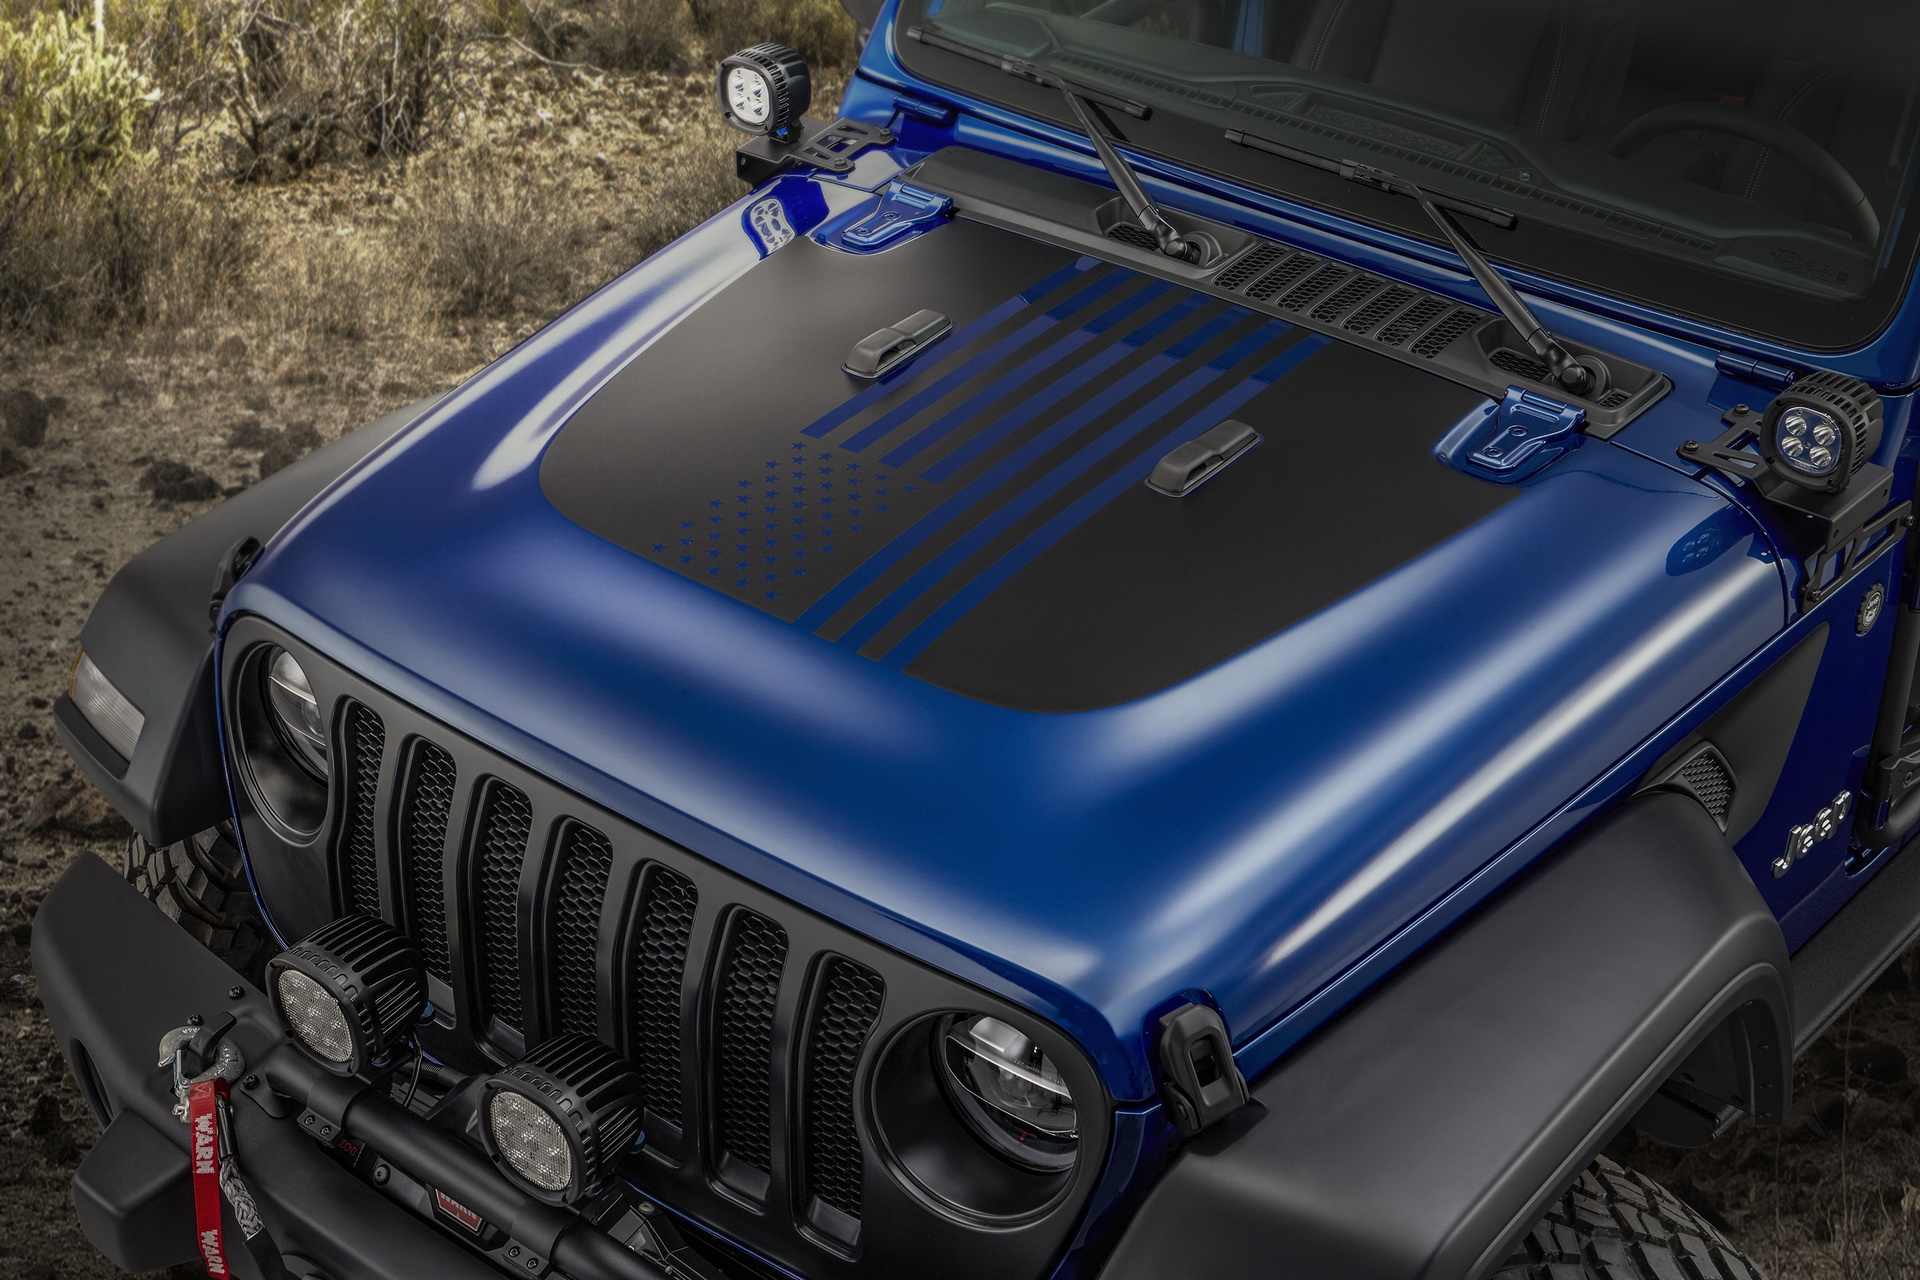 21 Jeep Wrangler Getting Ready To Fight New Ford Bronco With Small Updates Carscoops